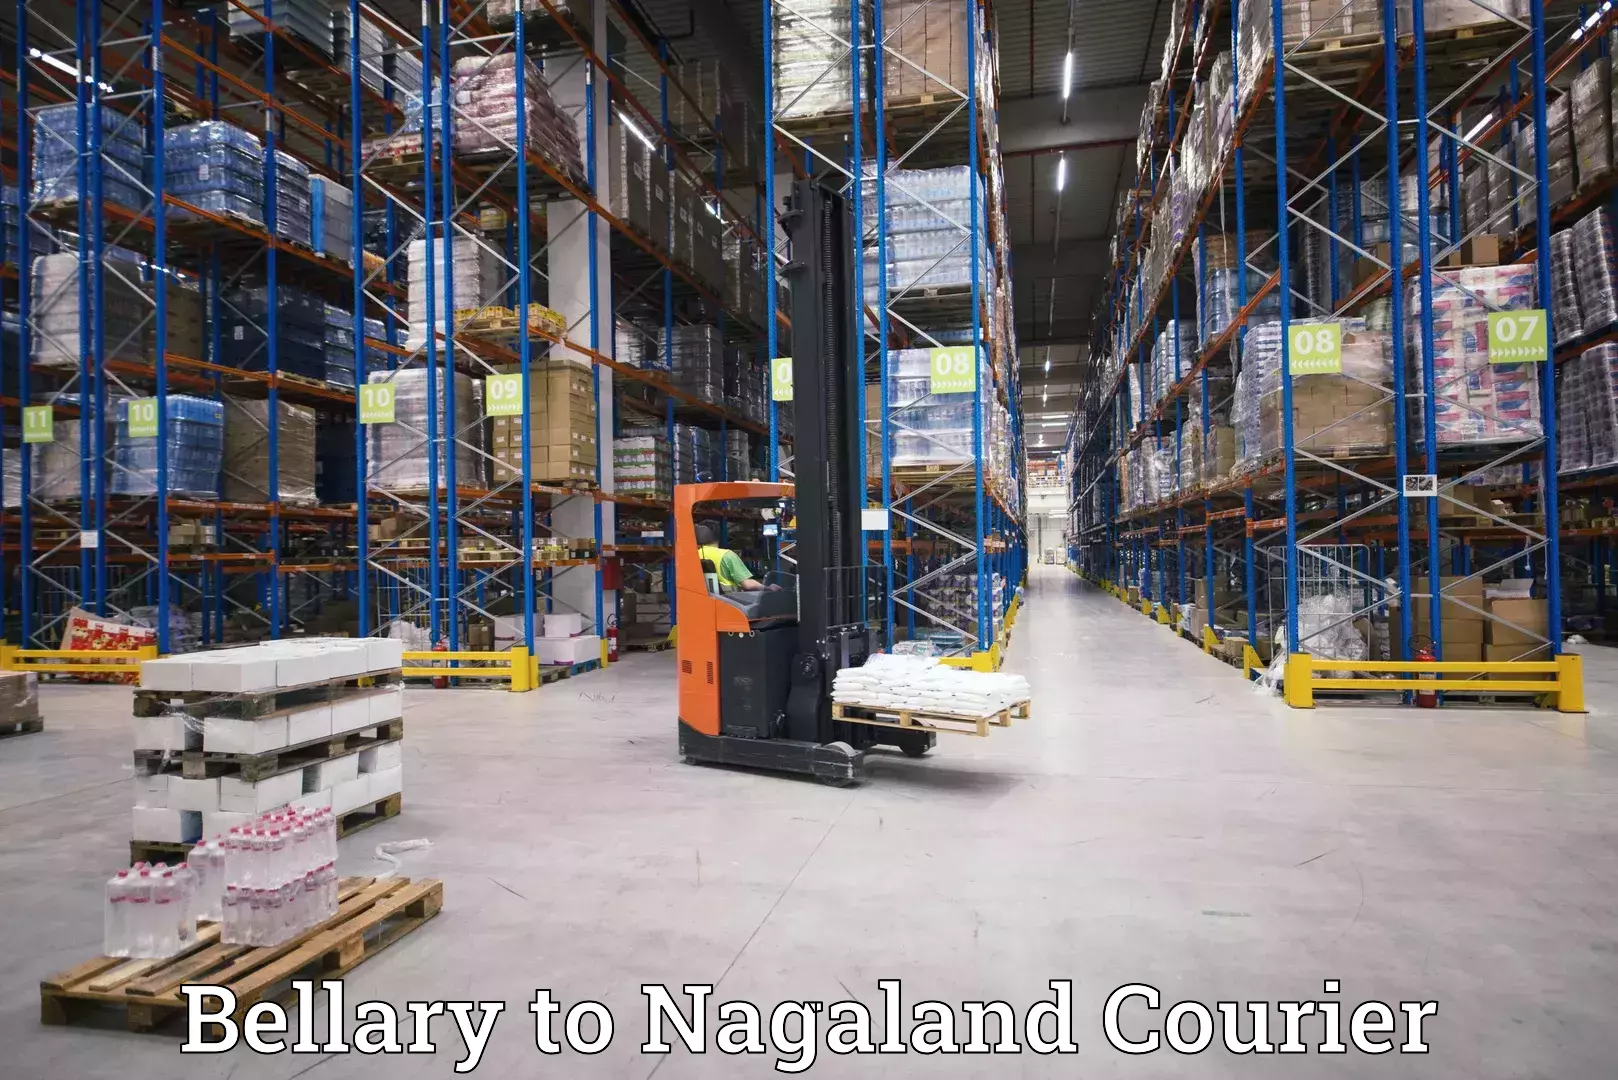 International courier networks Bellary to Nagaland